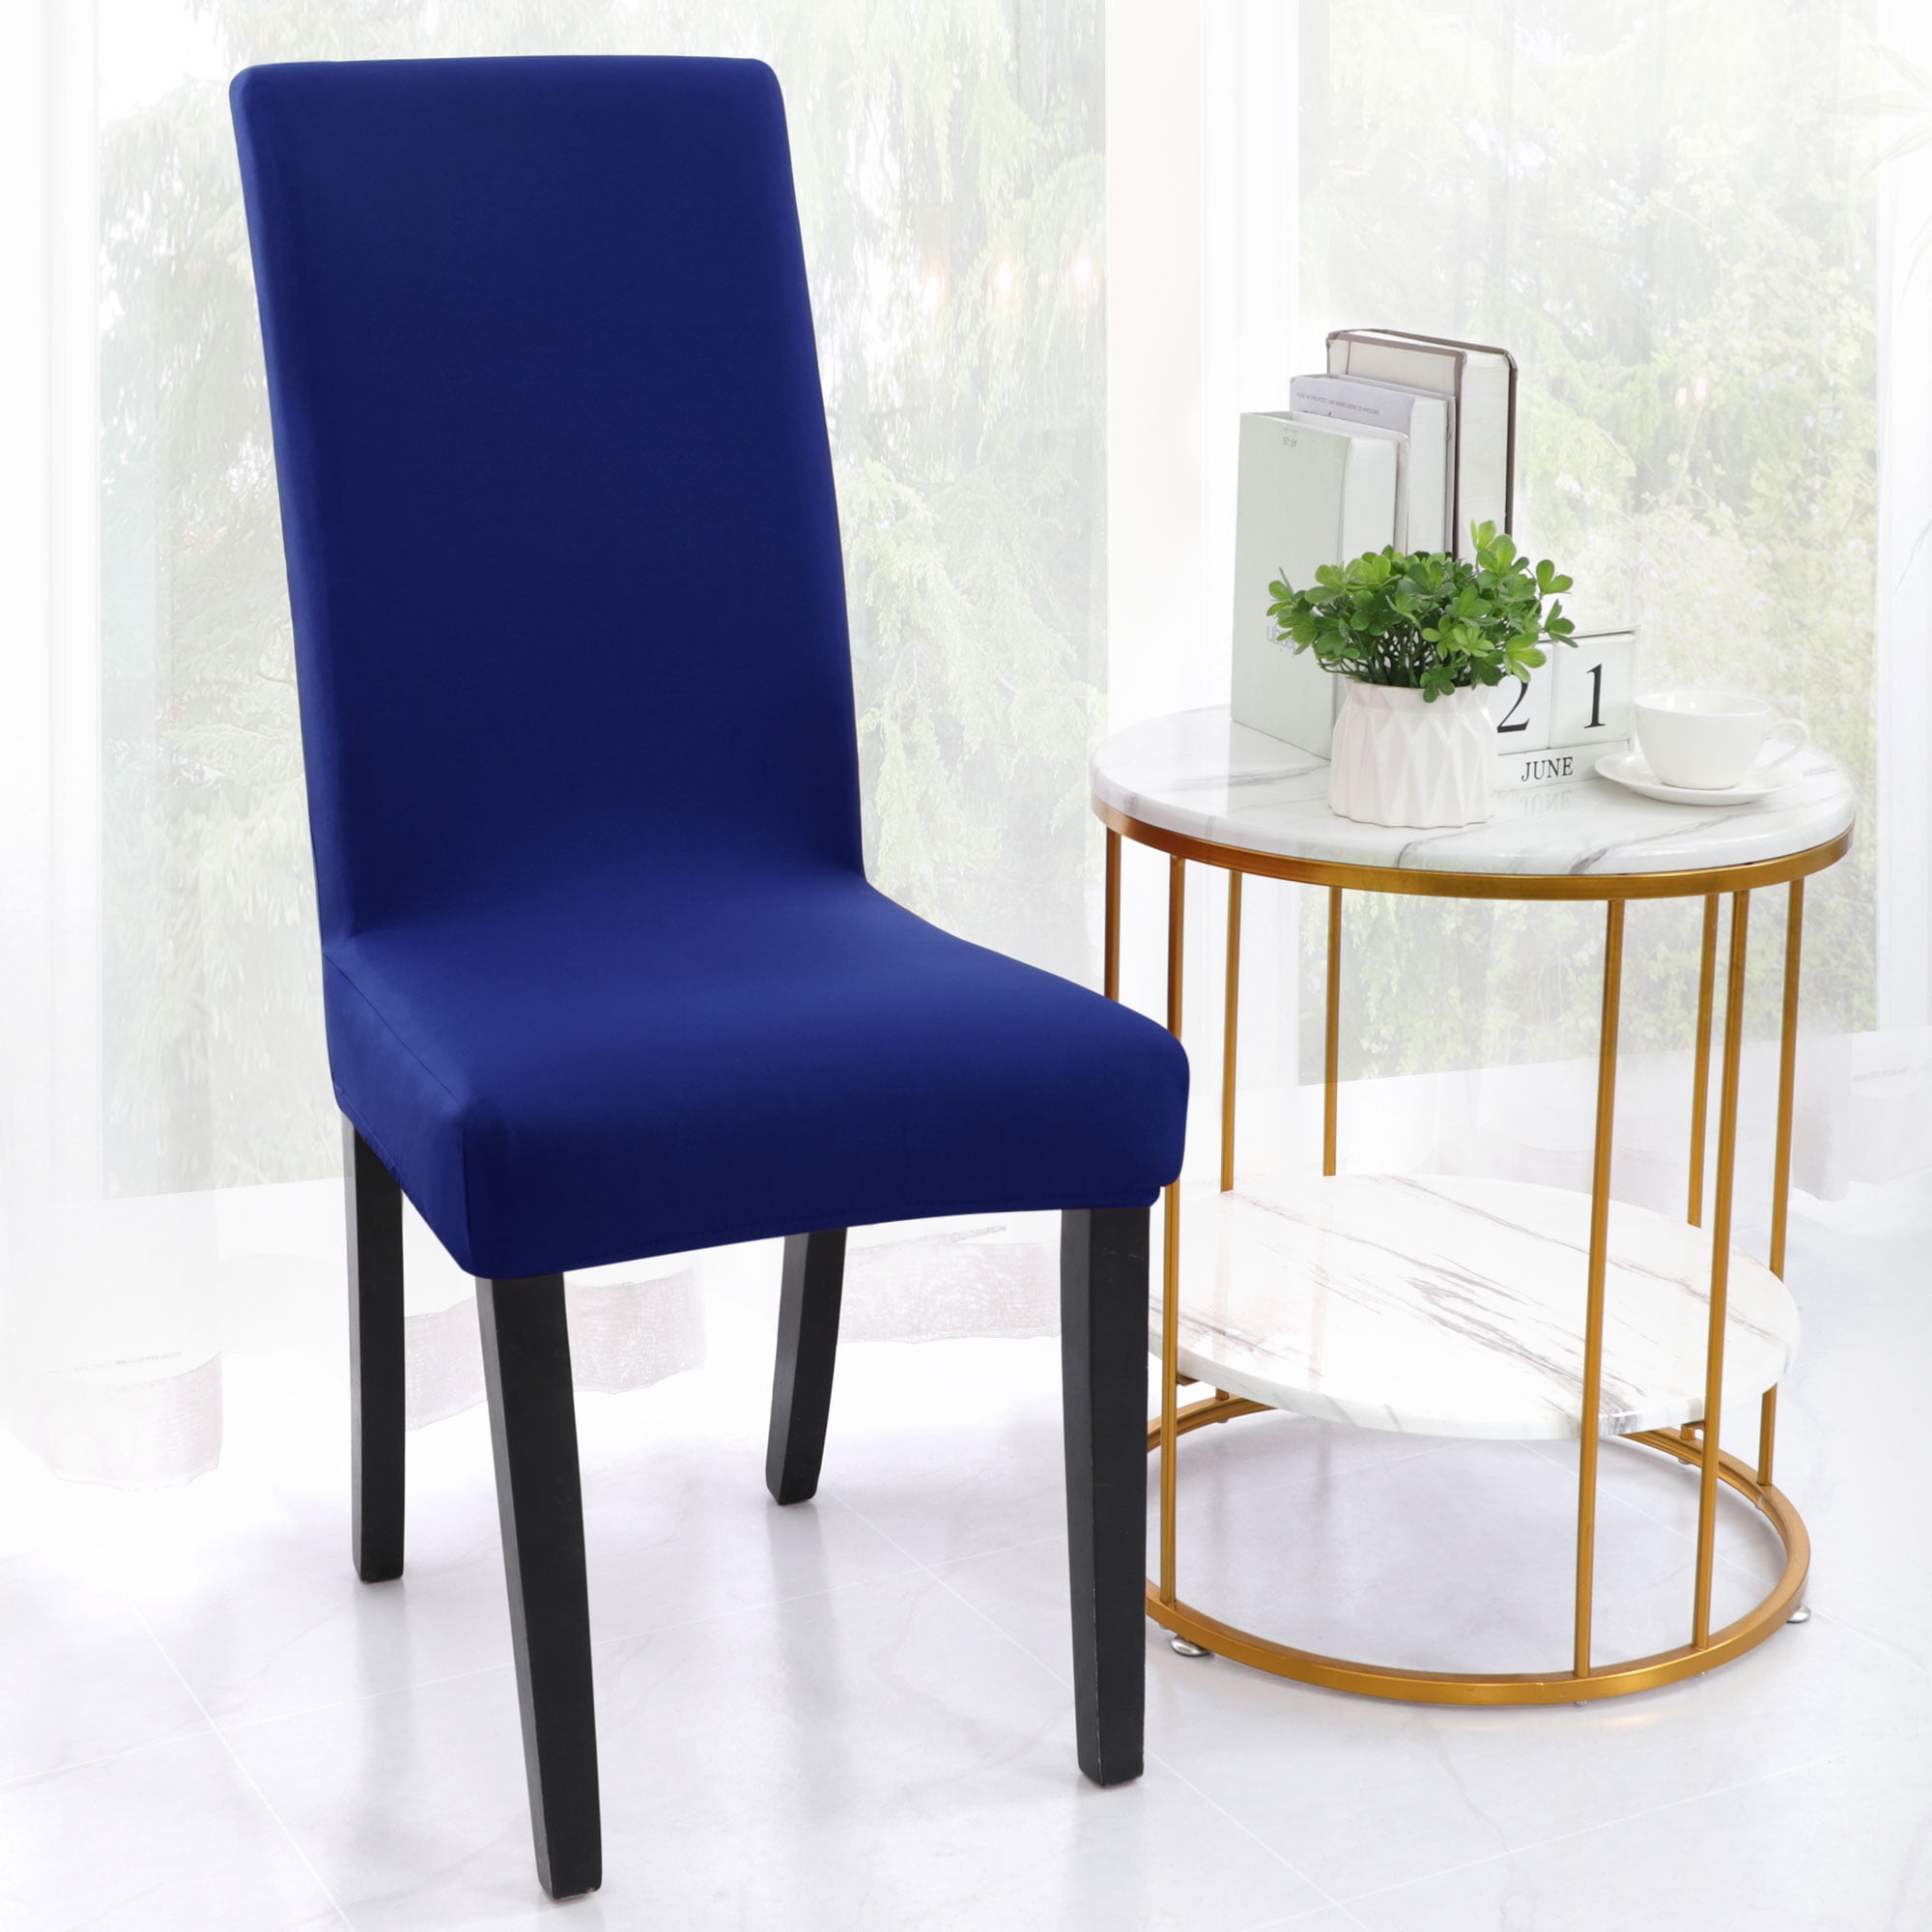 Details about   Stretchy Dining Chair Cover with Skirt Party Slipcovers Furniture Protector Home